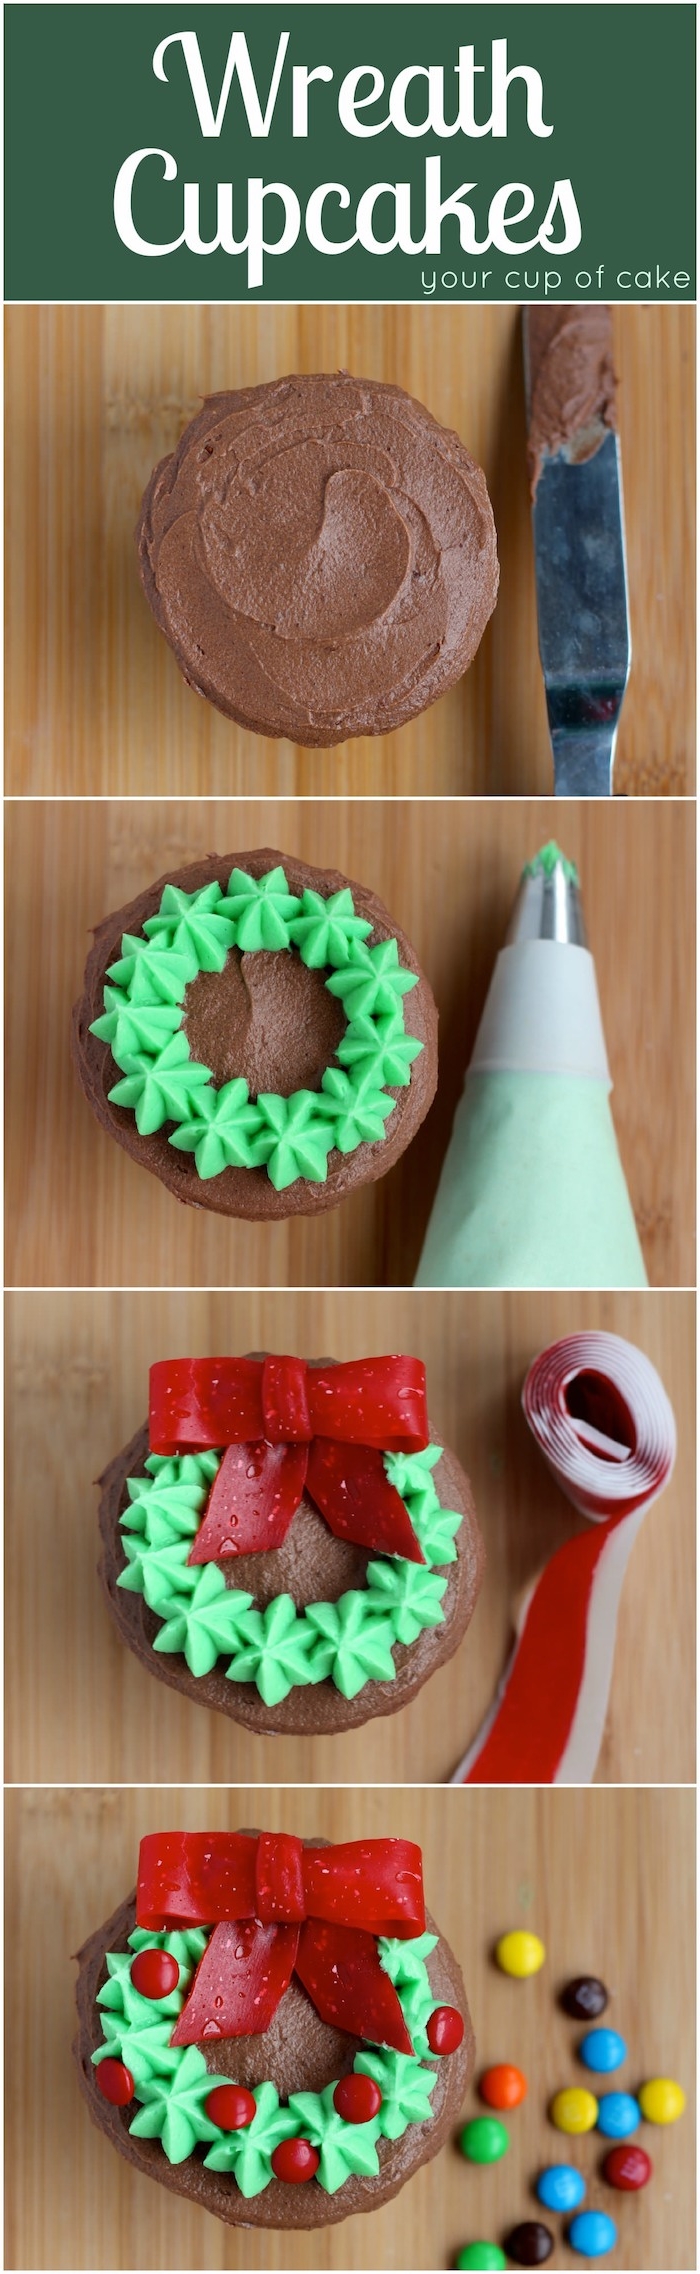 chocolate cupcakes images, cupcake with smooth chocolate frosting, with added green icing, bow cut from red jelly candies, colorful bon bon decorations